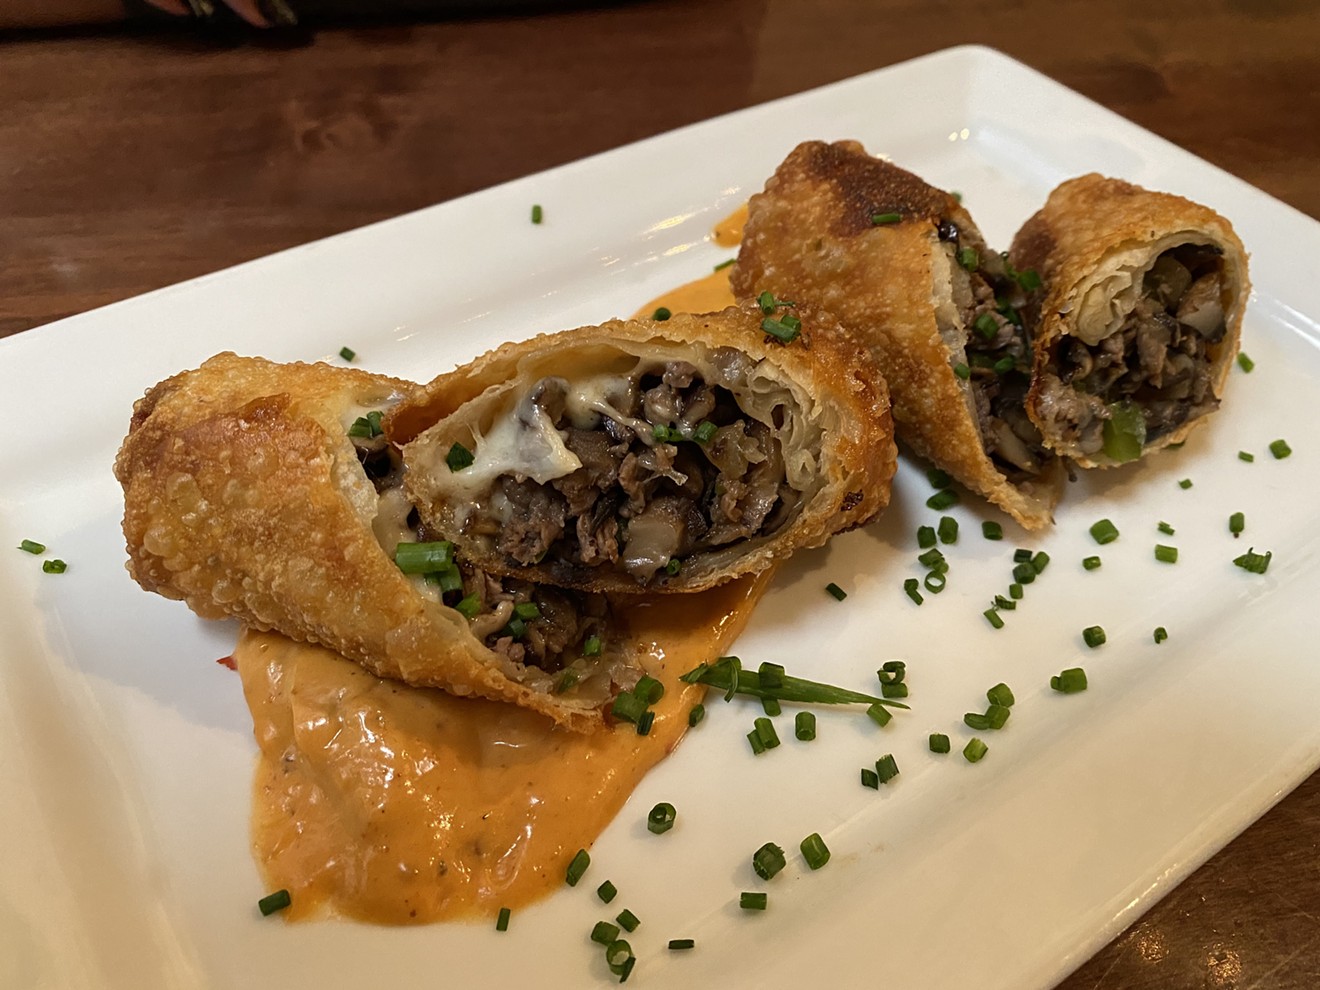 There will be no more Philly cheesesteak egg rolls in Wash Park.